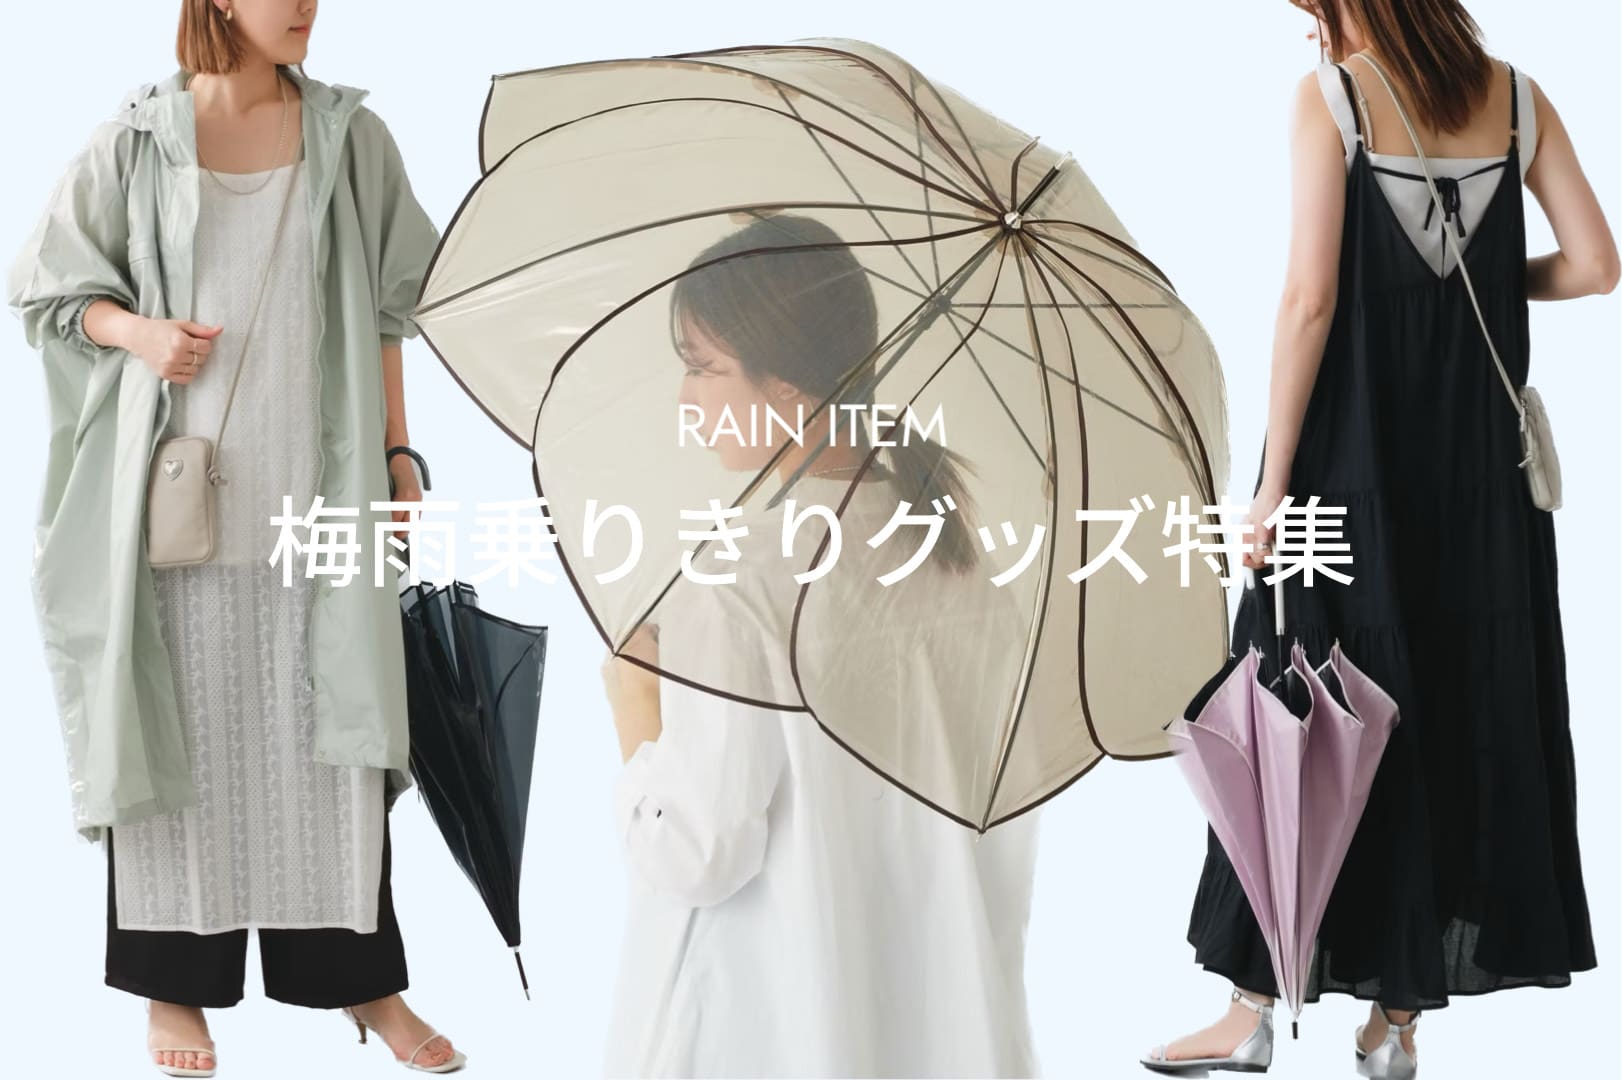 Pal collection 梅雨乗りきりグッズ！